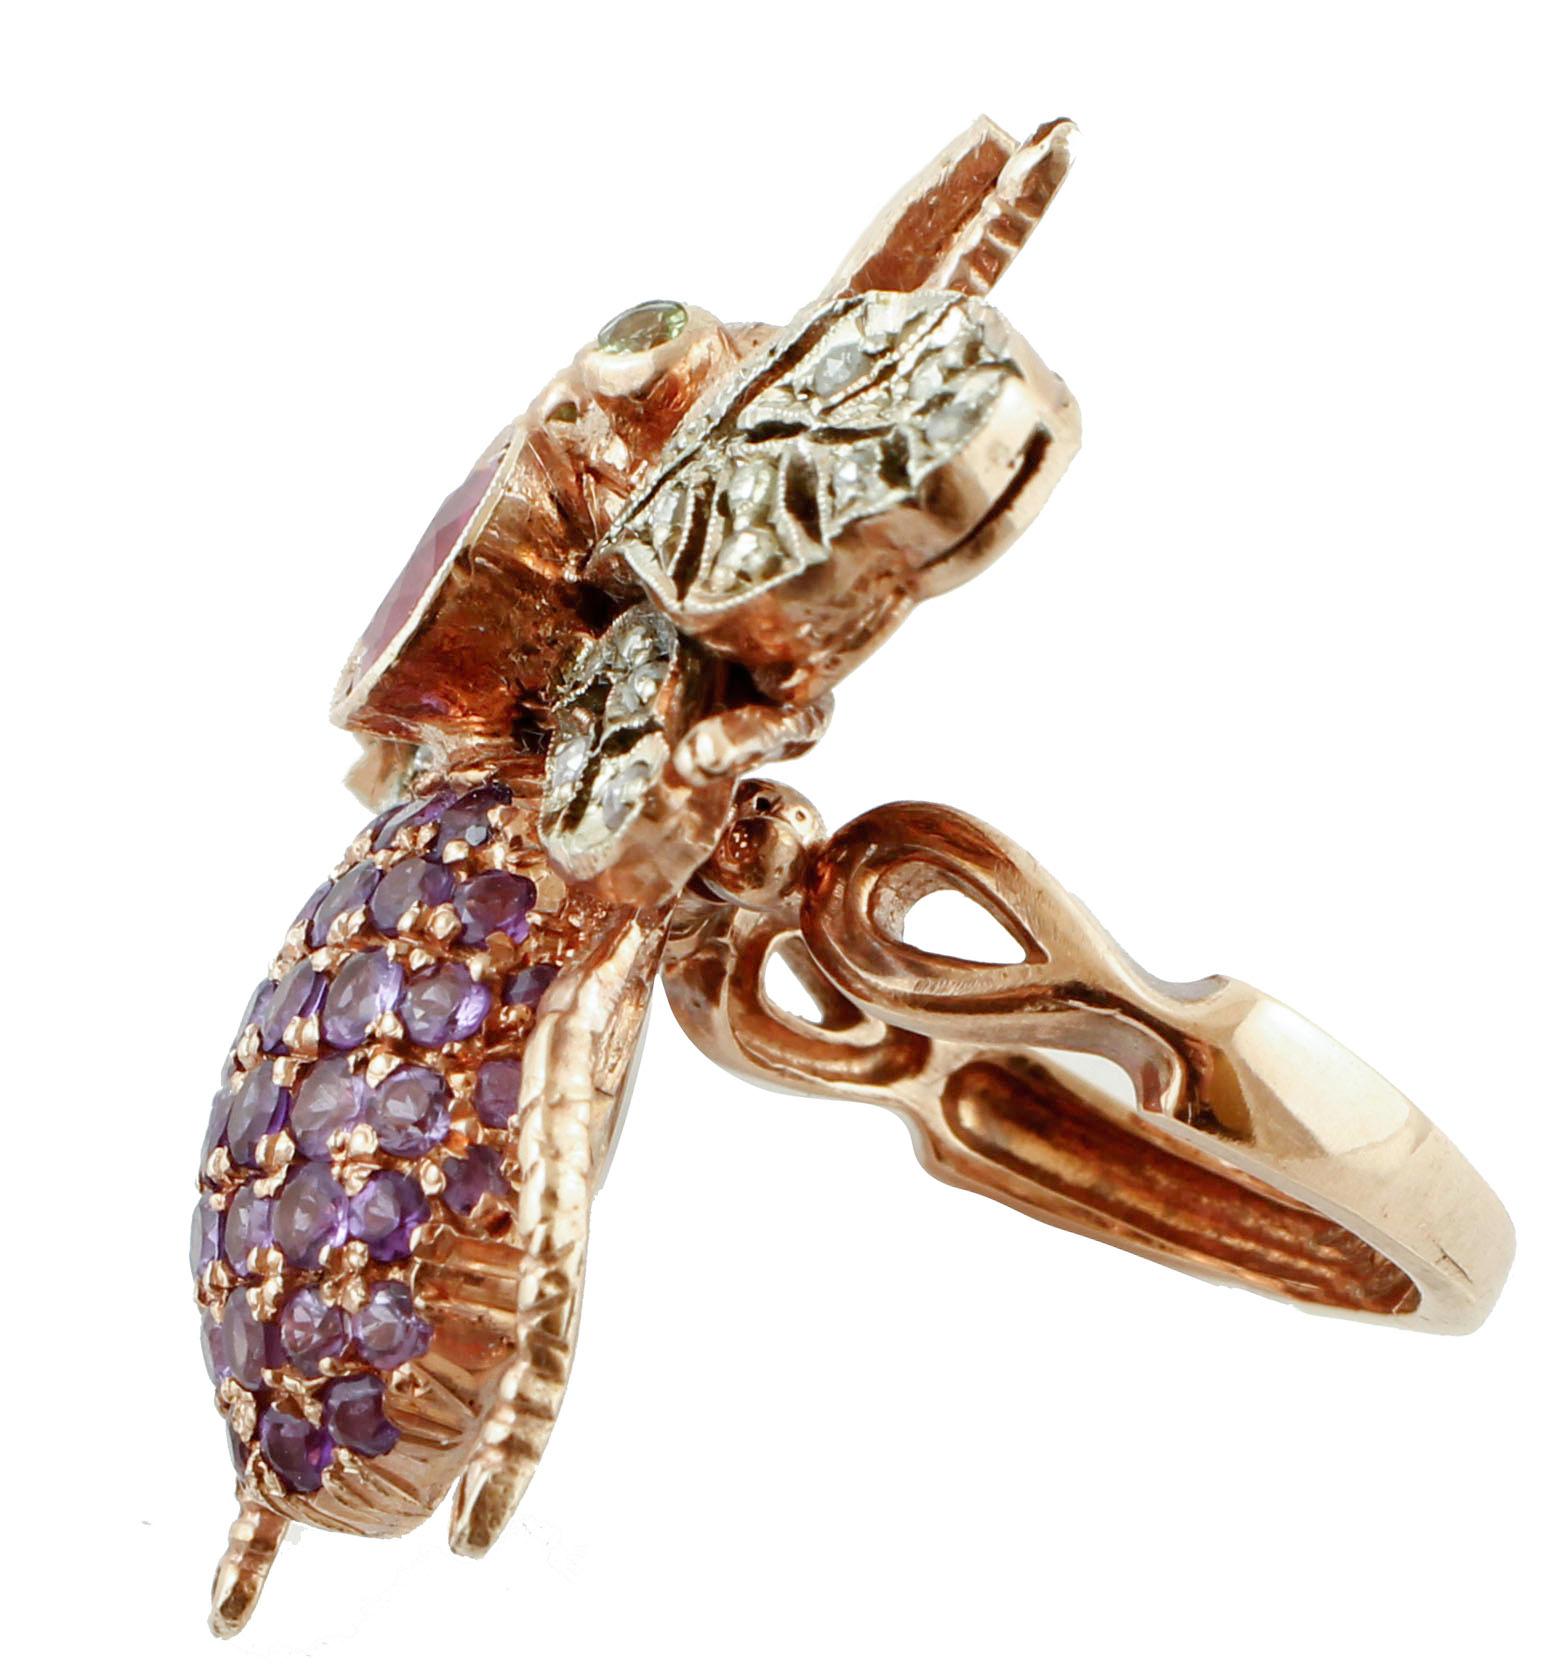 Unique retrò fashion ring realized with fly movable shape in 9K rose gold and silver structure. It has 2 peridots as eyes, and 1.93 ct of ruby on the neck, it is studded with amethysts on the body and with 0.44 ct of little diamonds on the